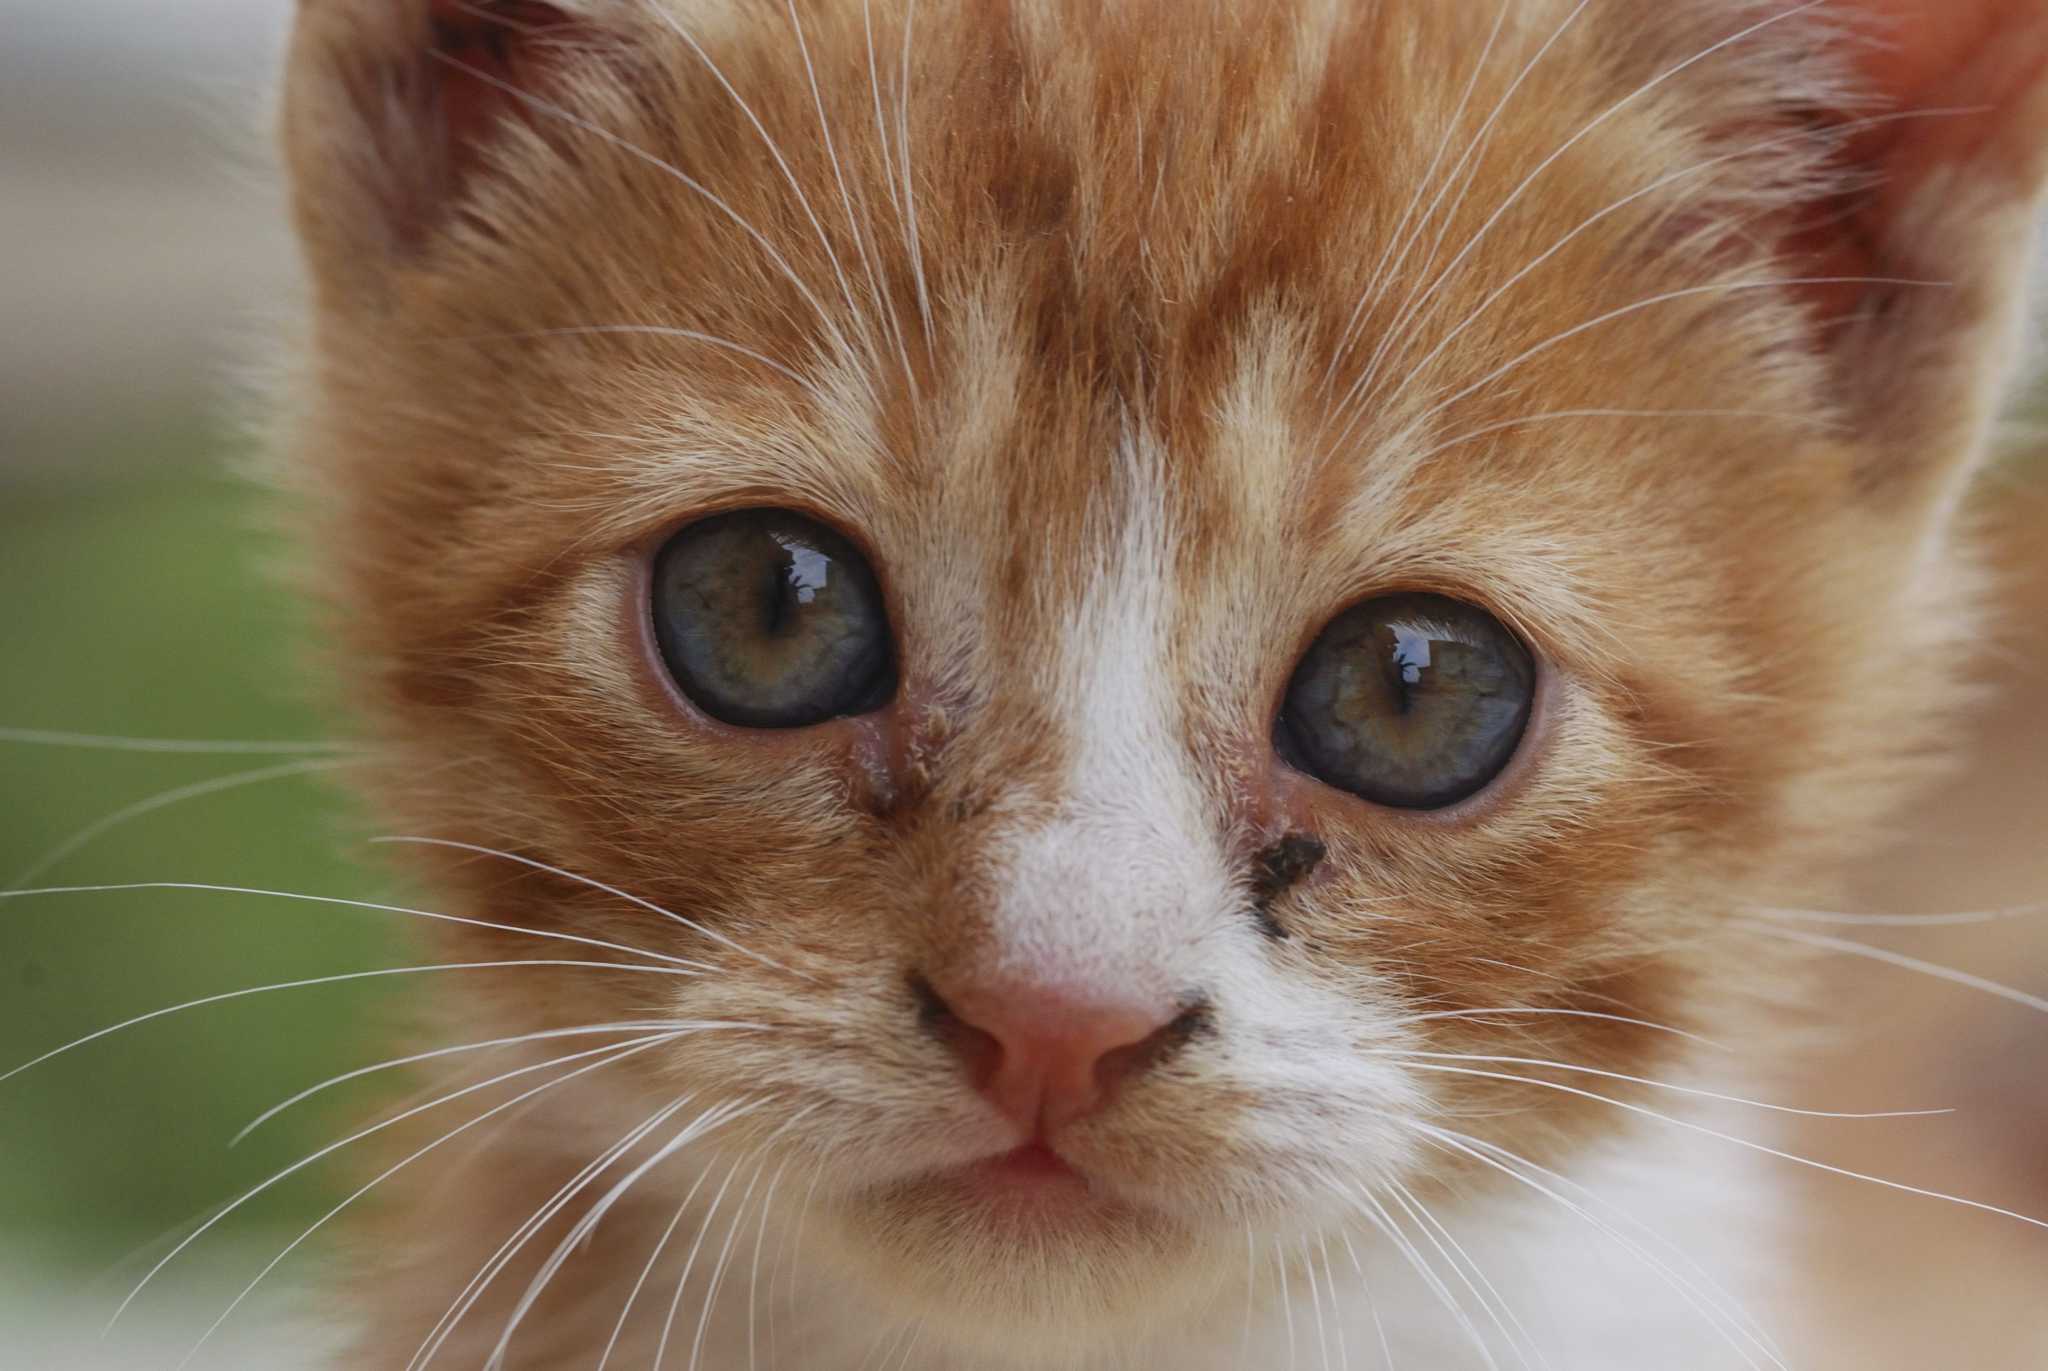 16 Crazy Cat Facts We Bet You Didn't Know